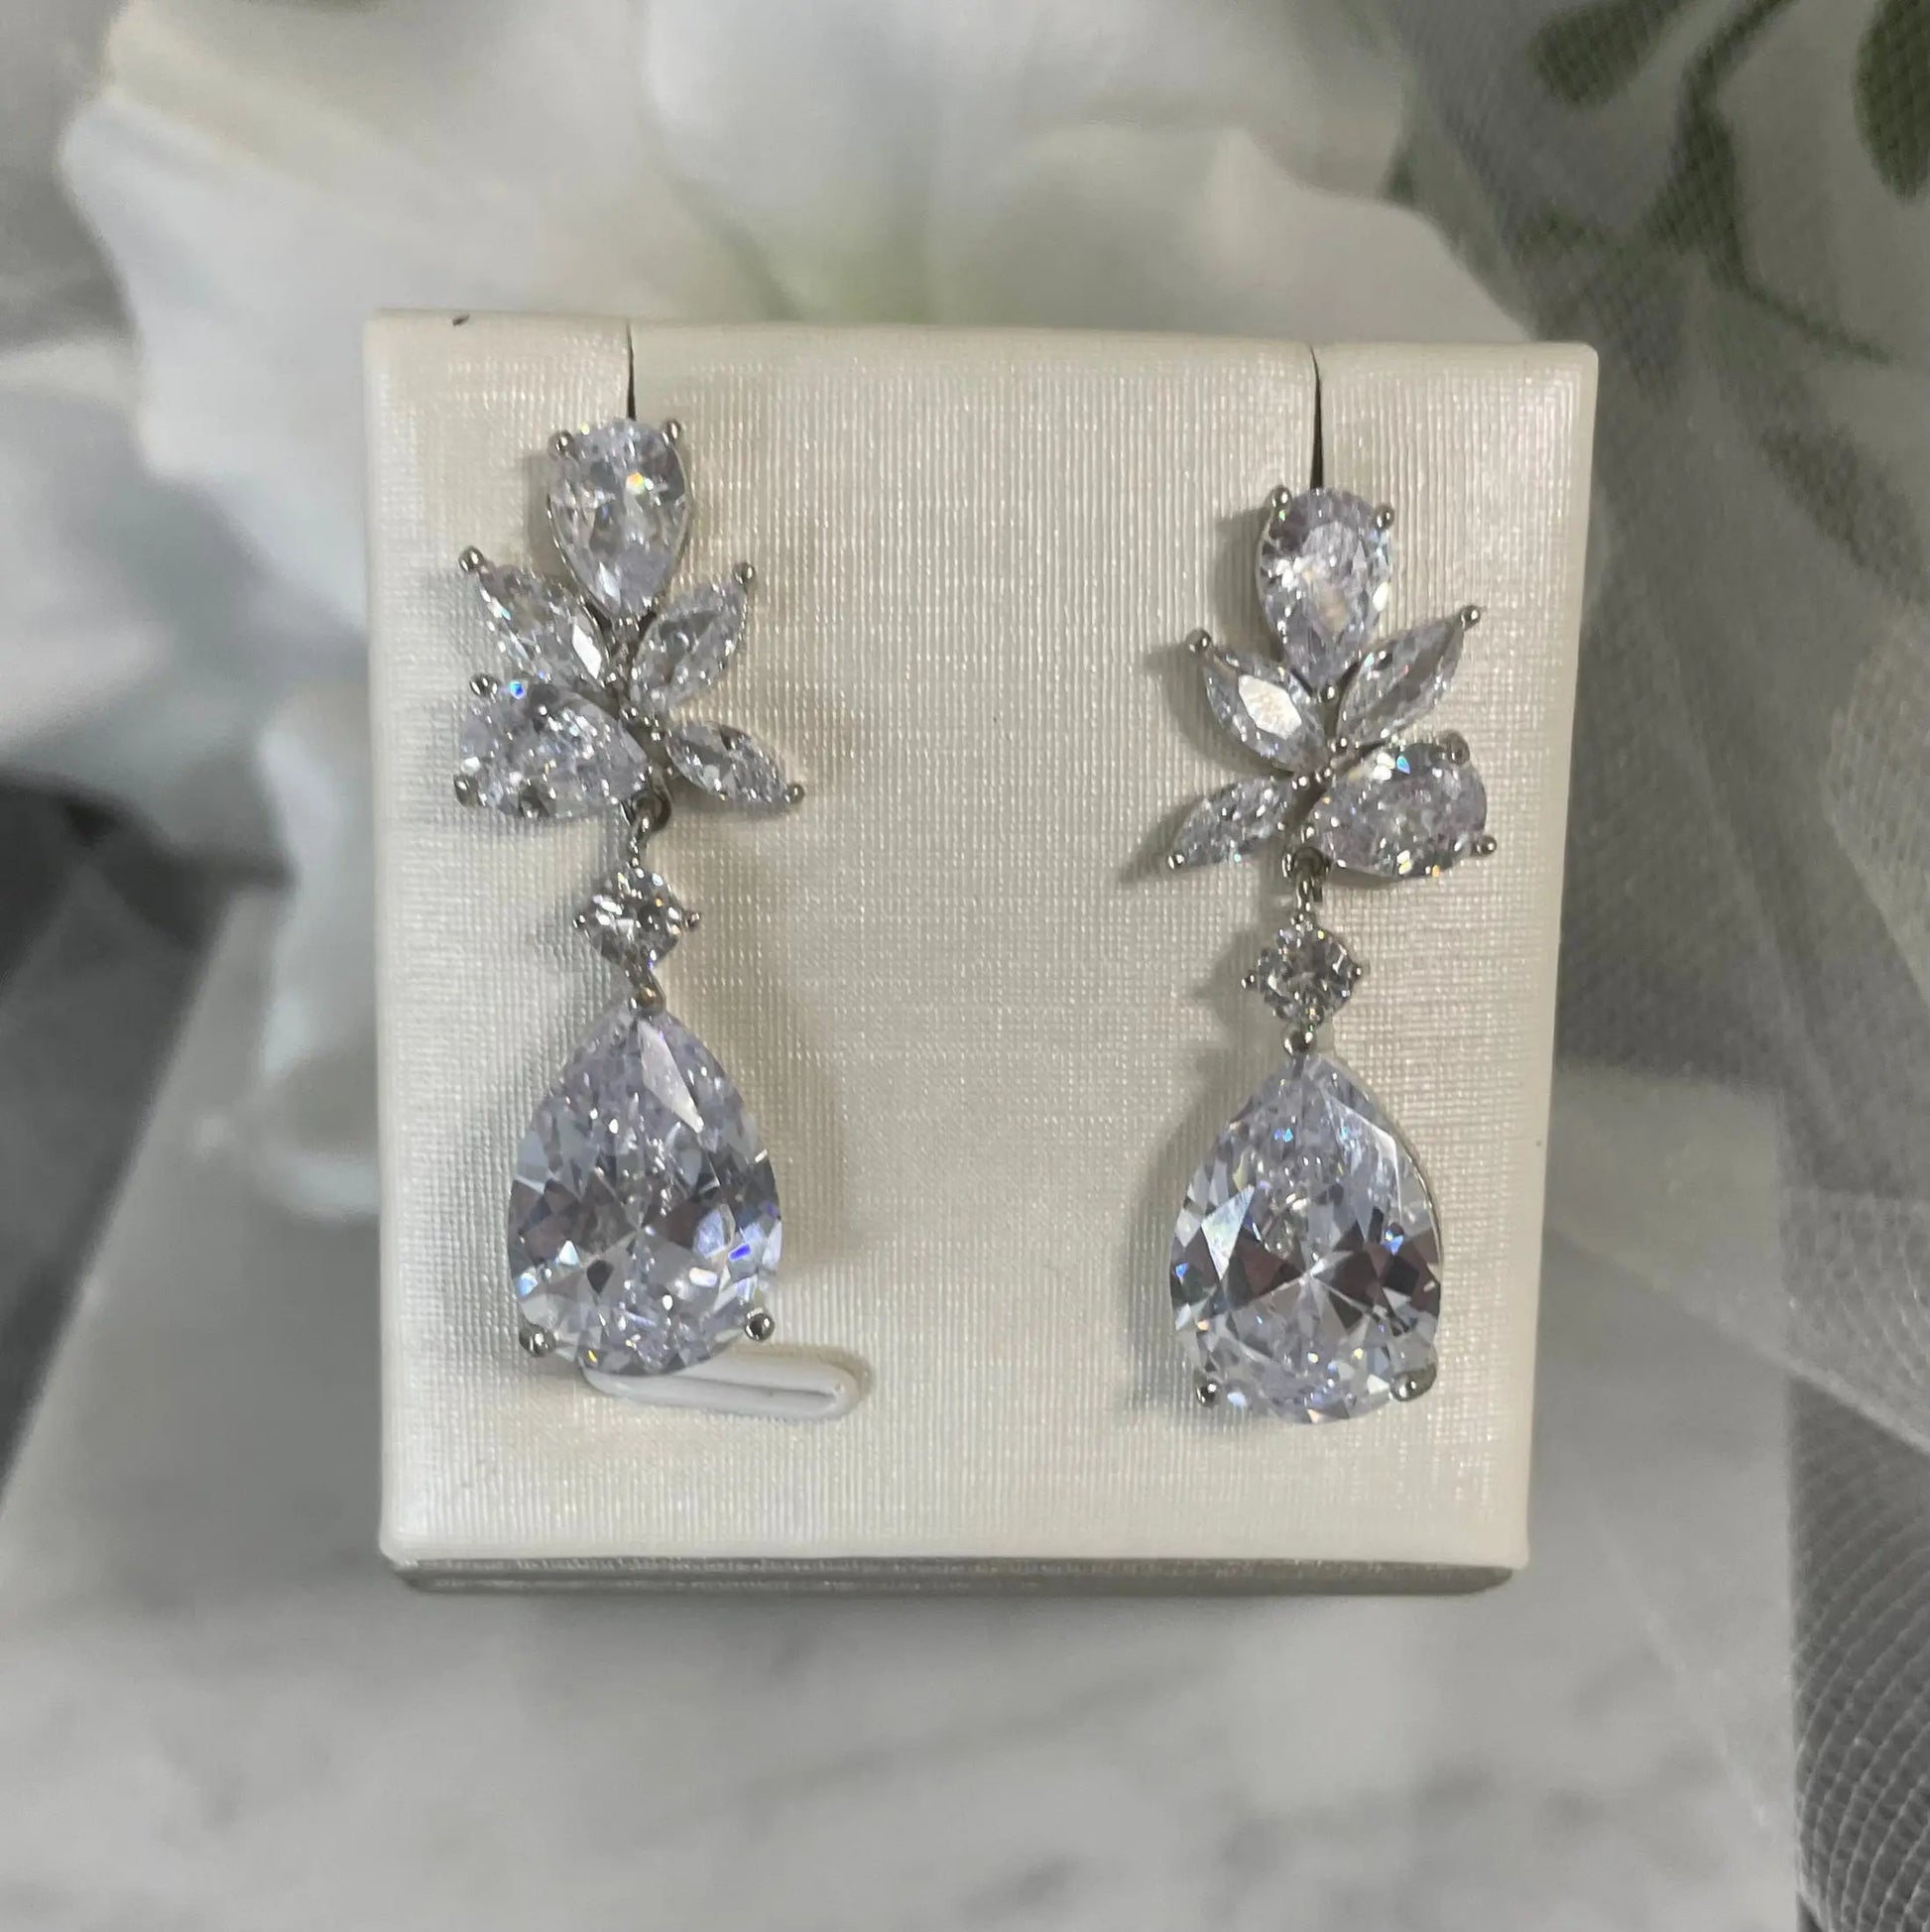 Tegan teardrop crystal earrings with a unique scattered crystal design in rhodium-plated metal, ideal for brides and bridesmaids seeking elegant and distinctive bridal jewelry.